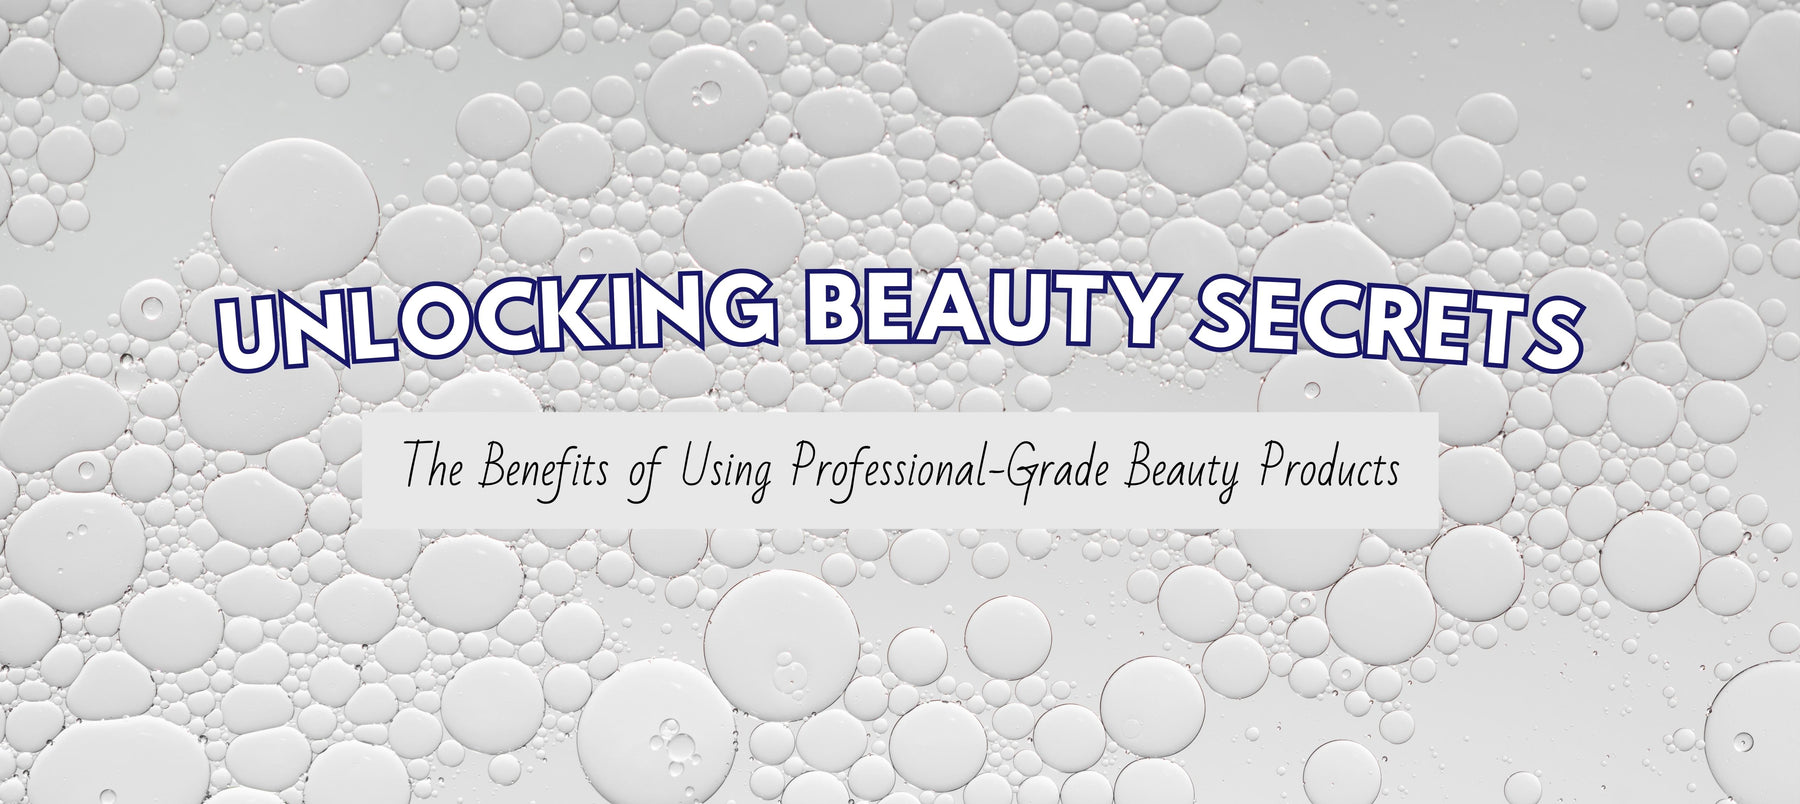 Unlocking the Secret of Professional-grade beauty products